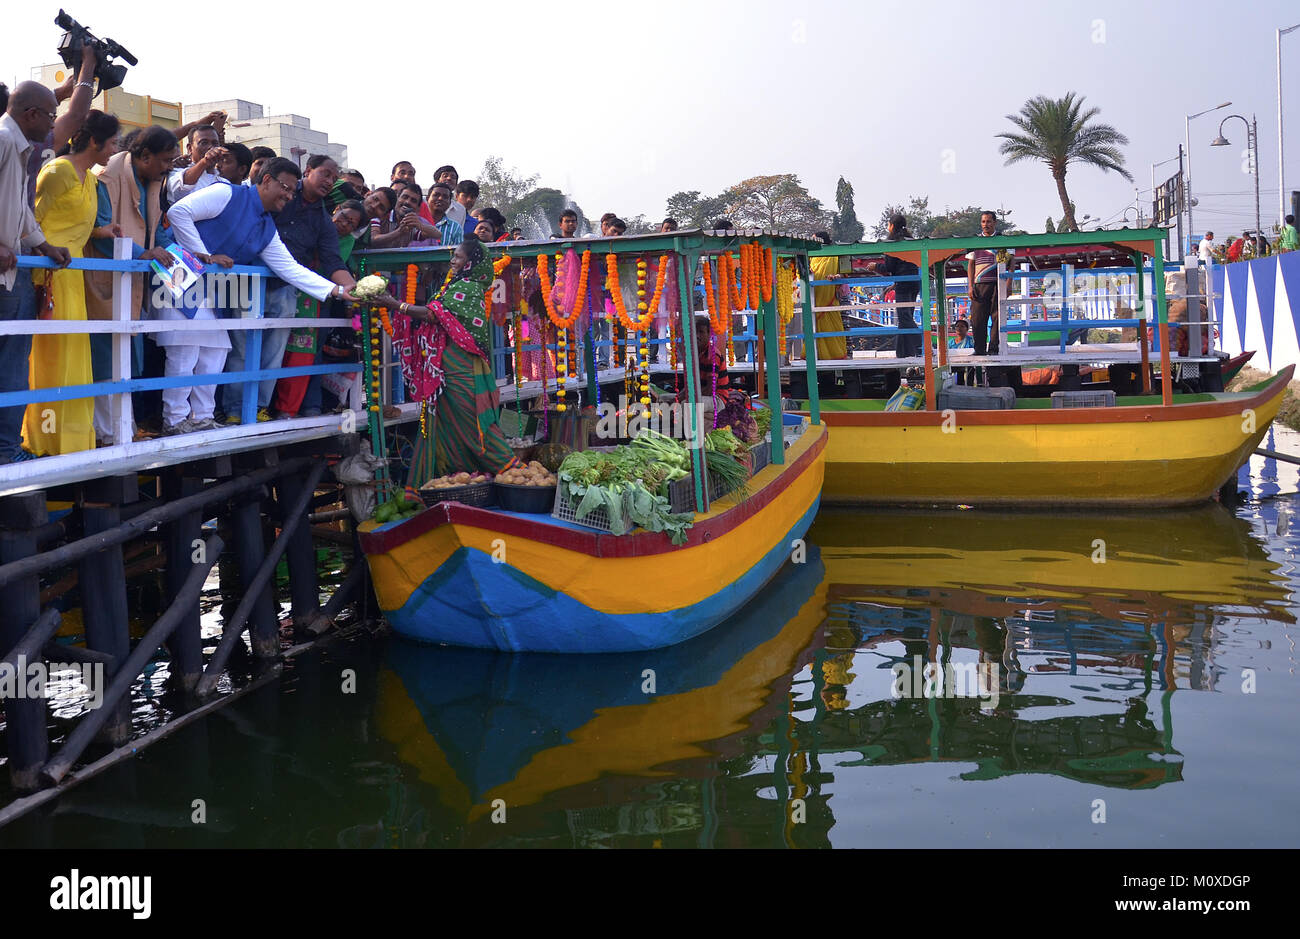 Kolkata, India. 24th Jan, 2018. Urban Development Minister of West Bengal Firhad Hakim visit the floating market after inaugurate ceremony. The floating market opened today in Kolkata's Patuli with 280 shops on boats.The floating market was inaugurated by Chief Minister Mamata Banerjee from Netaji Indoor Stadium in city of Kolkata, India on Thursday. Credit: Sanjay Purkait/Pacific Press/Alamy Live News Stock Photo